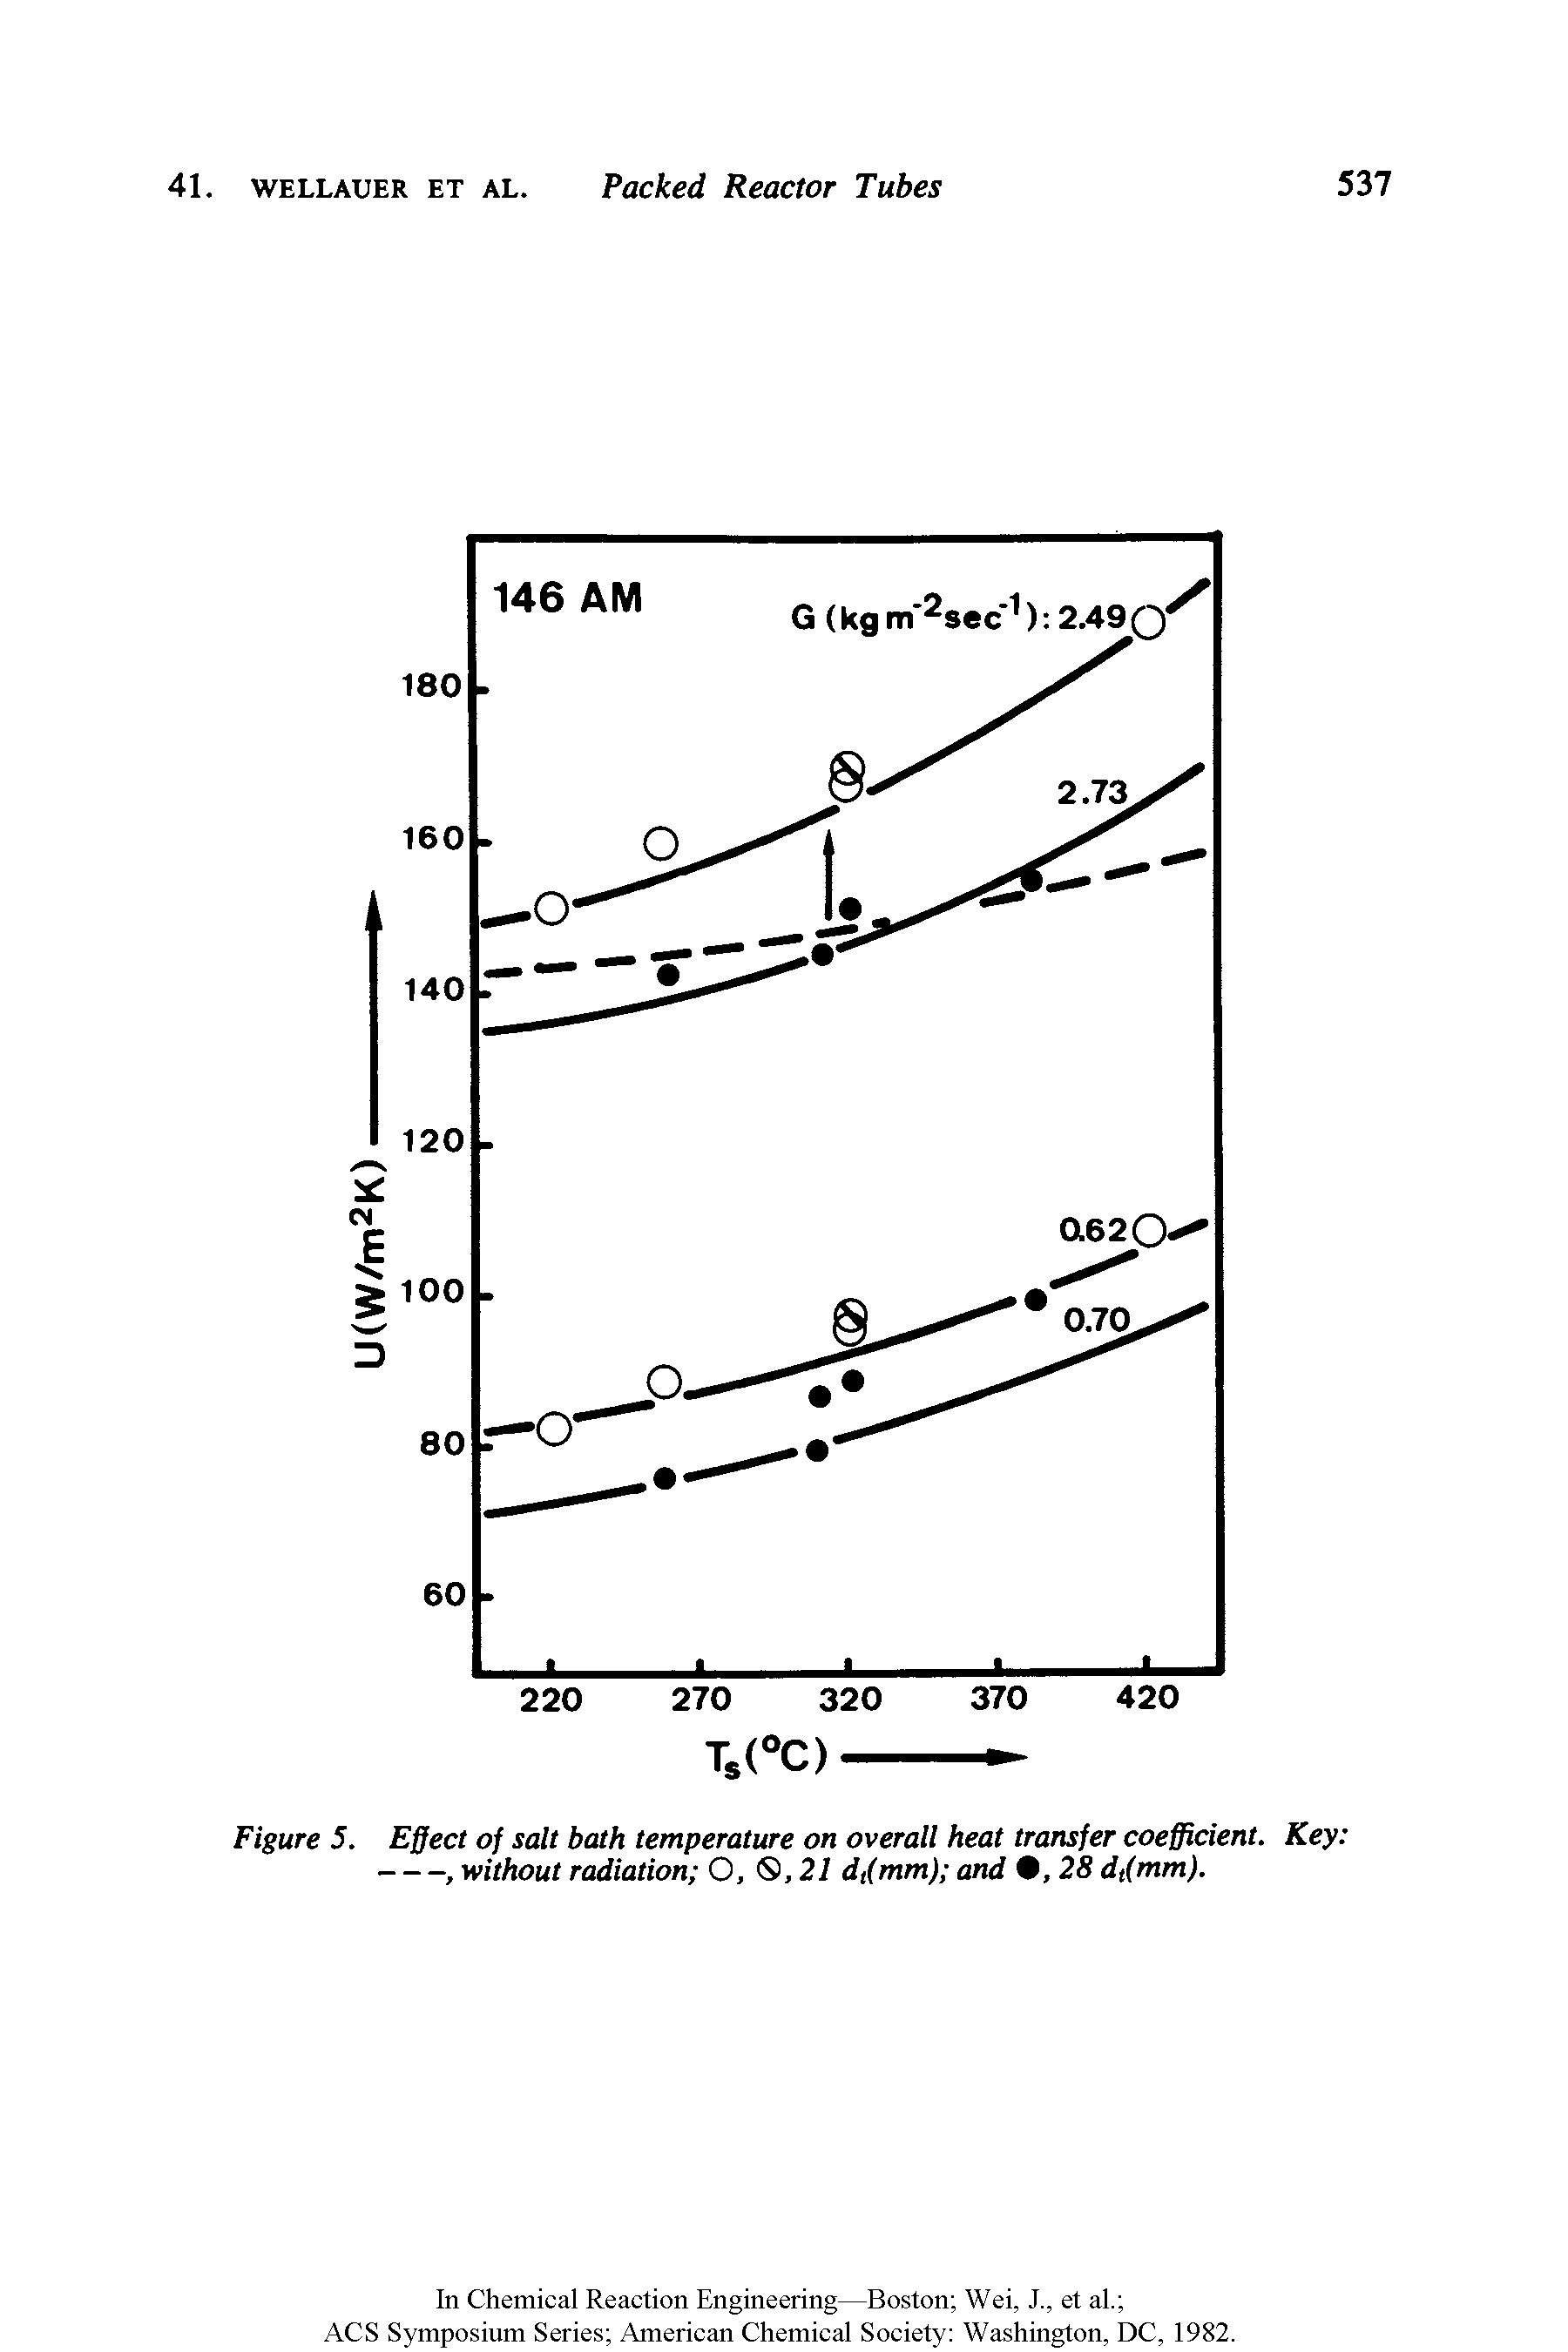 Figure 5. Effect of salt bath temperature on overall heat transfer coefficient. Key ------------------, without radiation O, <S, 21 dt(mm) and , 28 dt(mm).